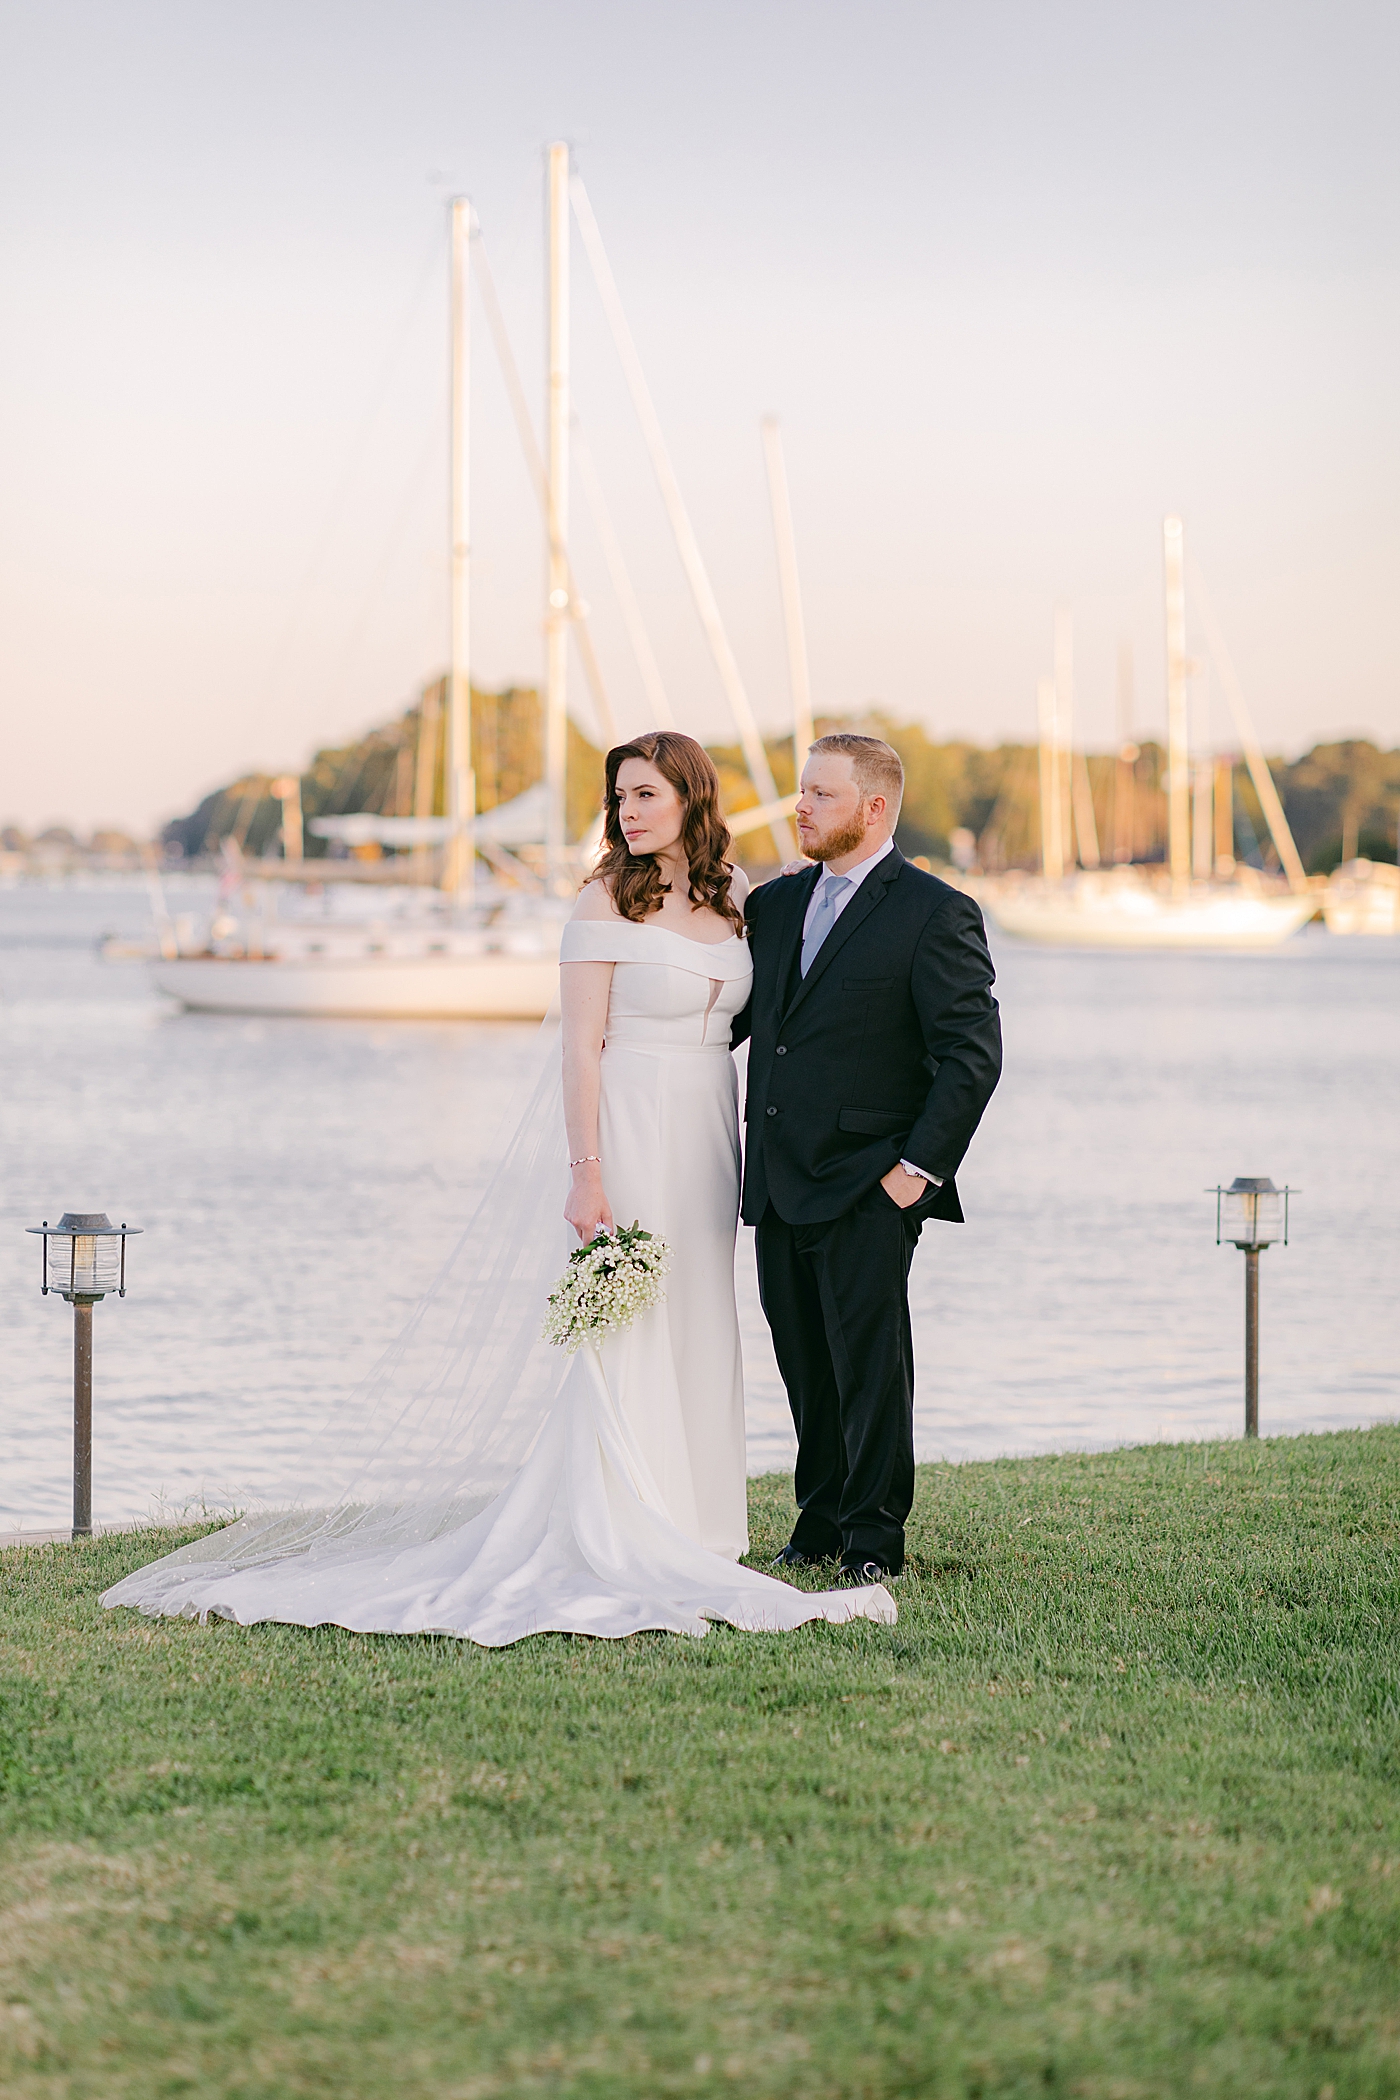 Bride and groom standing near a harbor | Photo by Hope Helmuth Photography